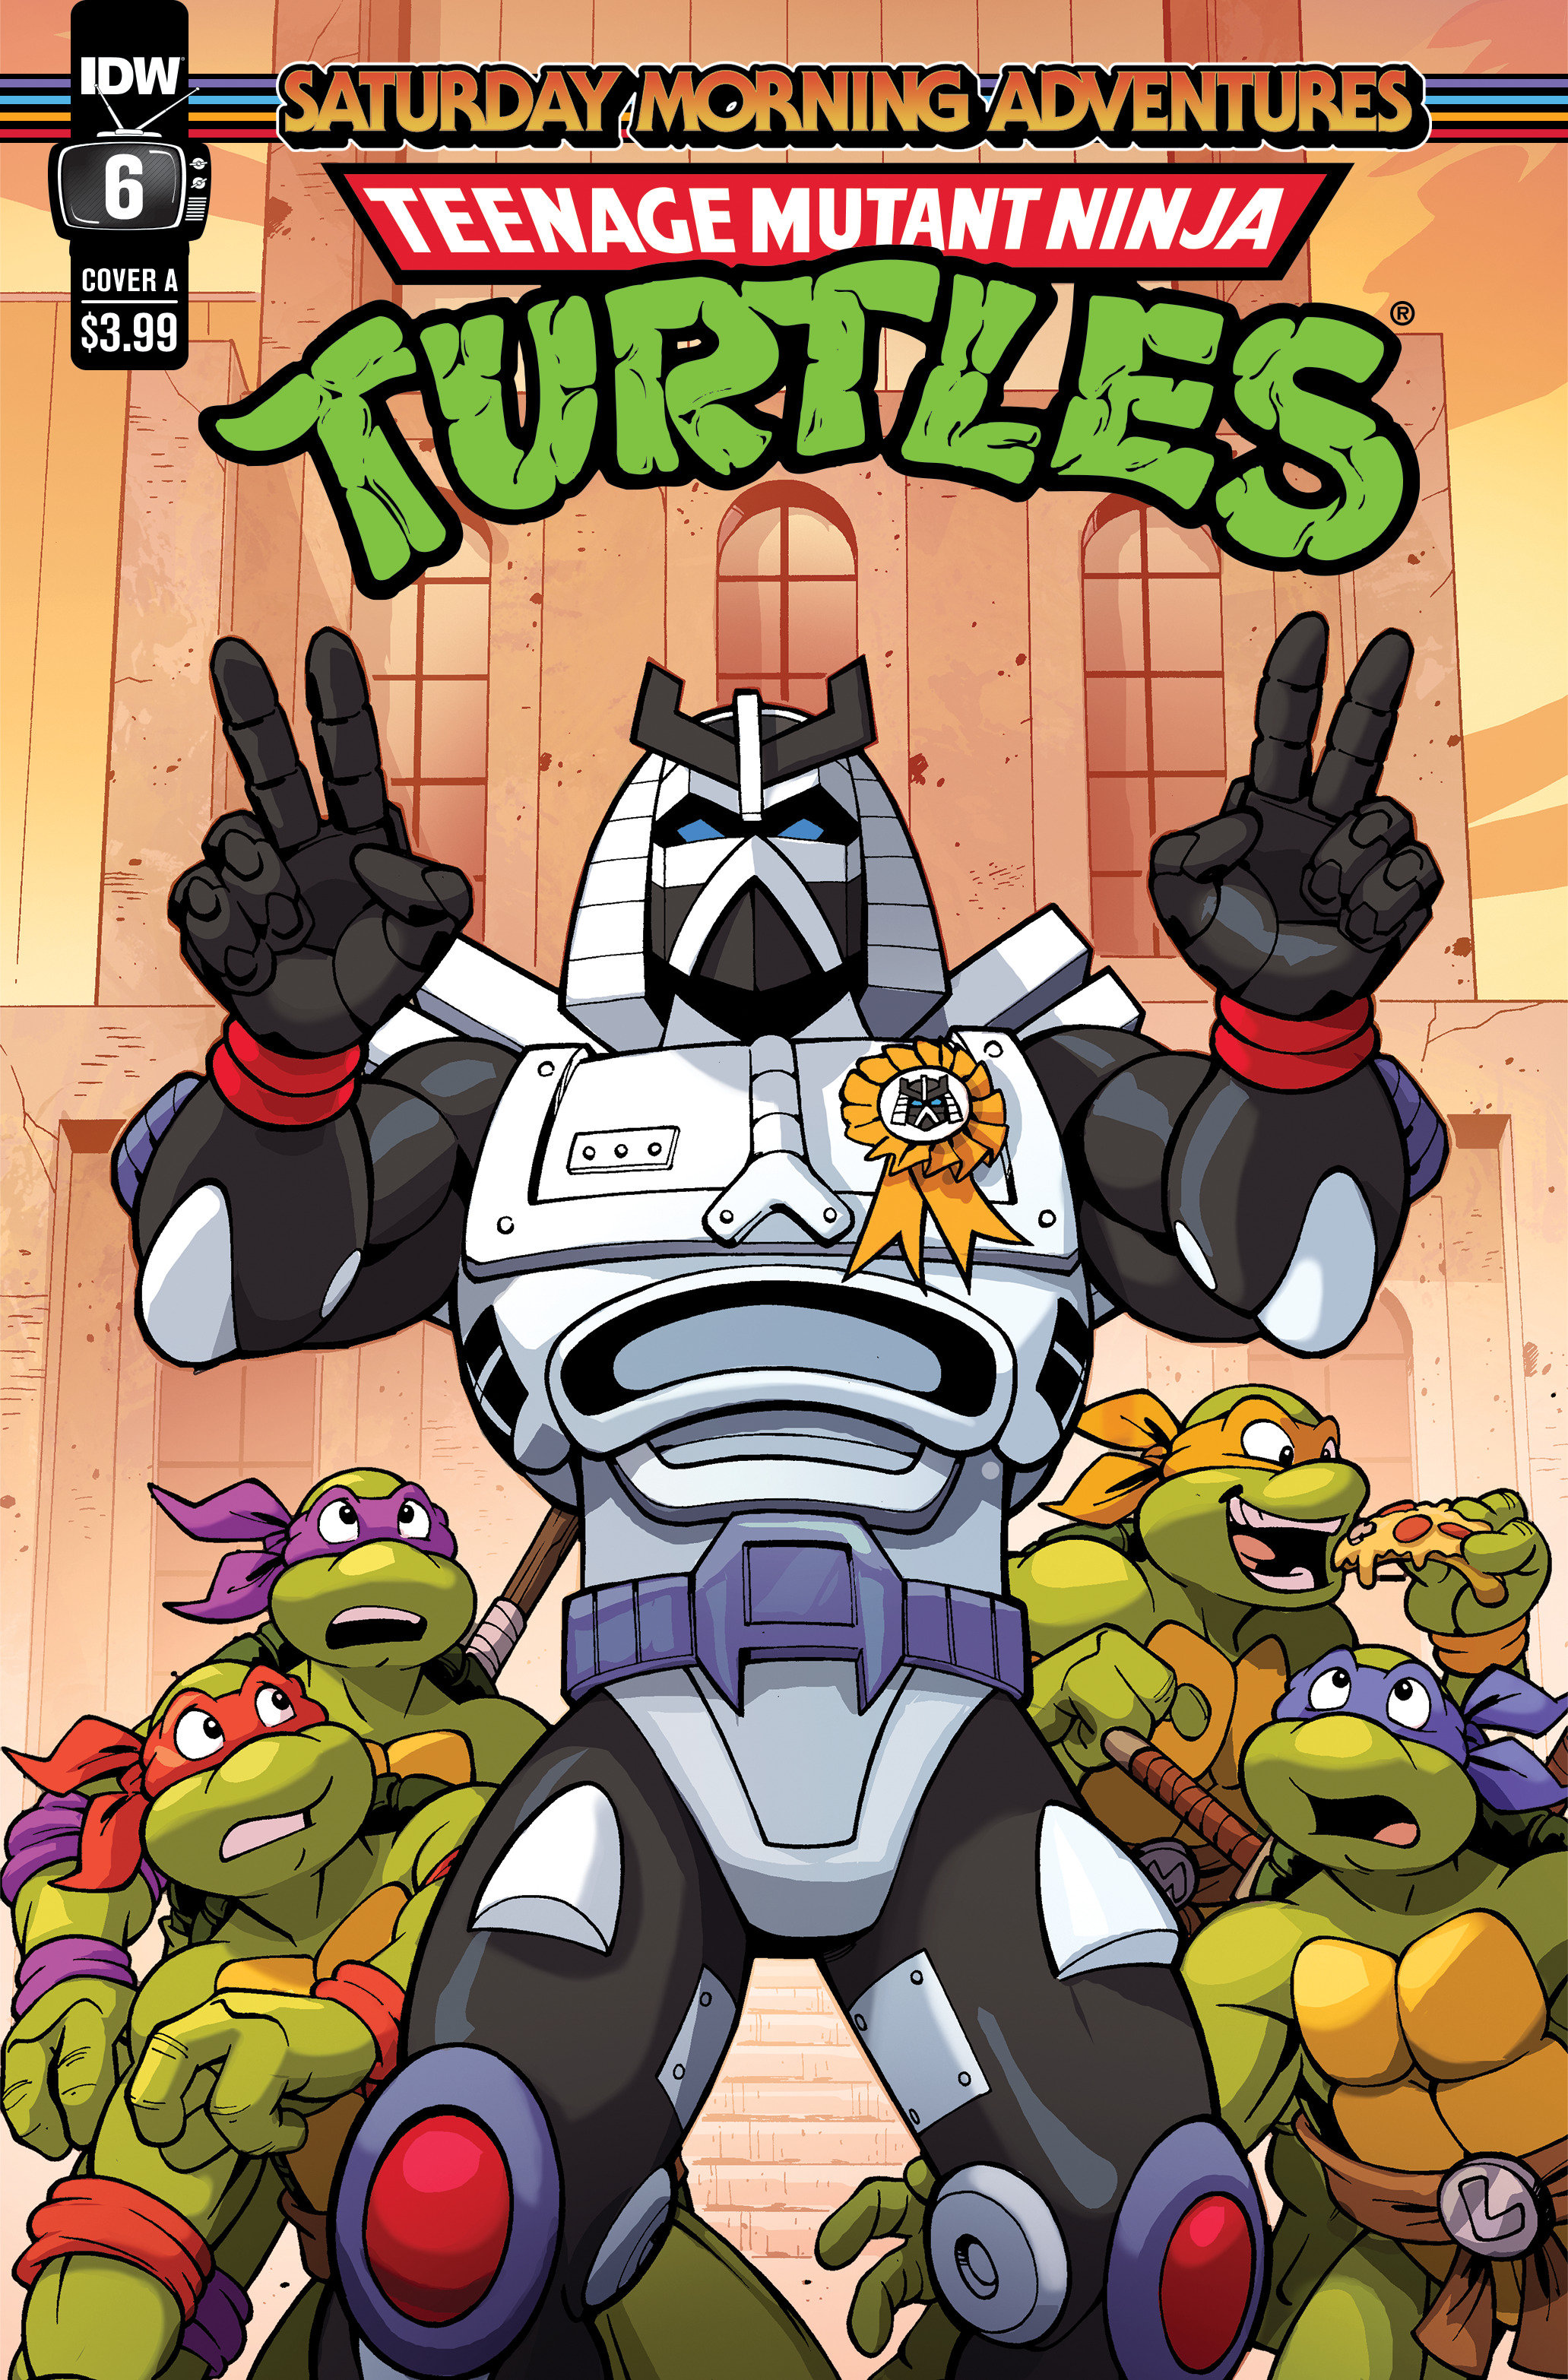 Teenage Mutant Ninja Turtles Saturday Morning Adventures Continued! #6 Cover A Lawrence